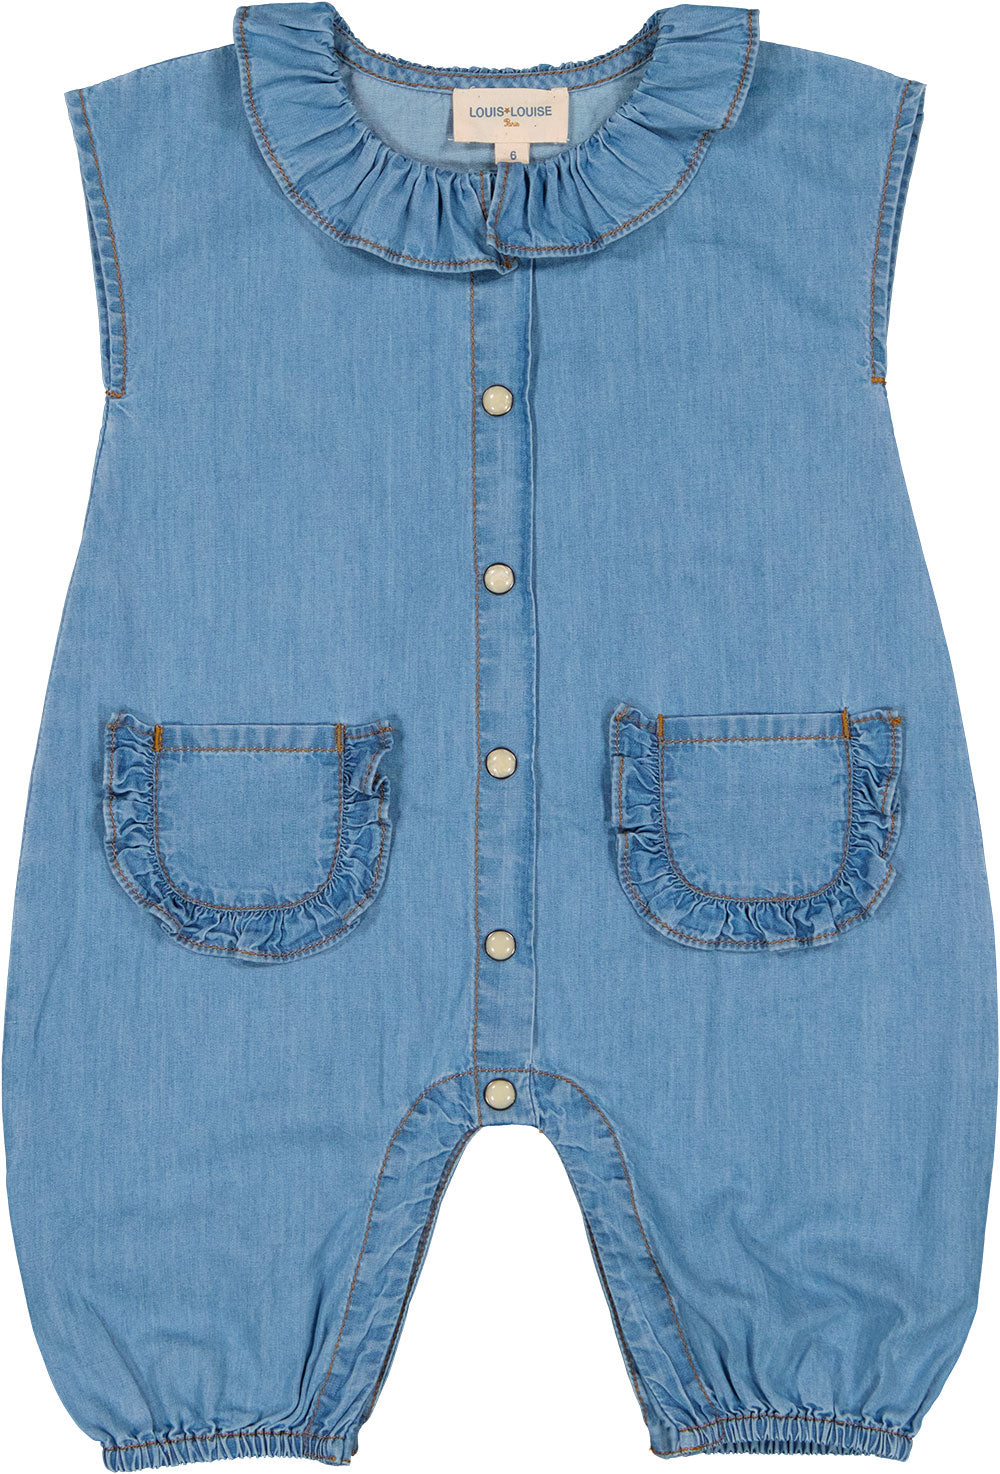 LOUIS LOUISE CHAMBRAY CROQUETTE OVERALL